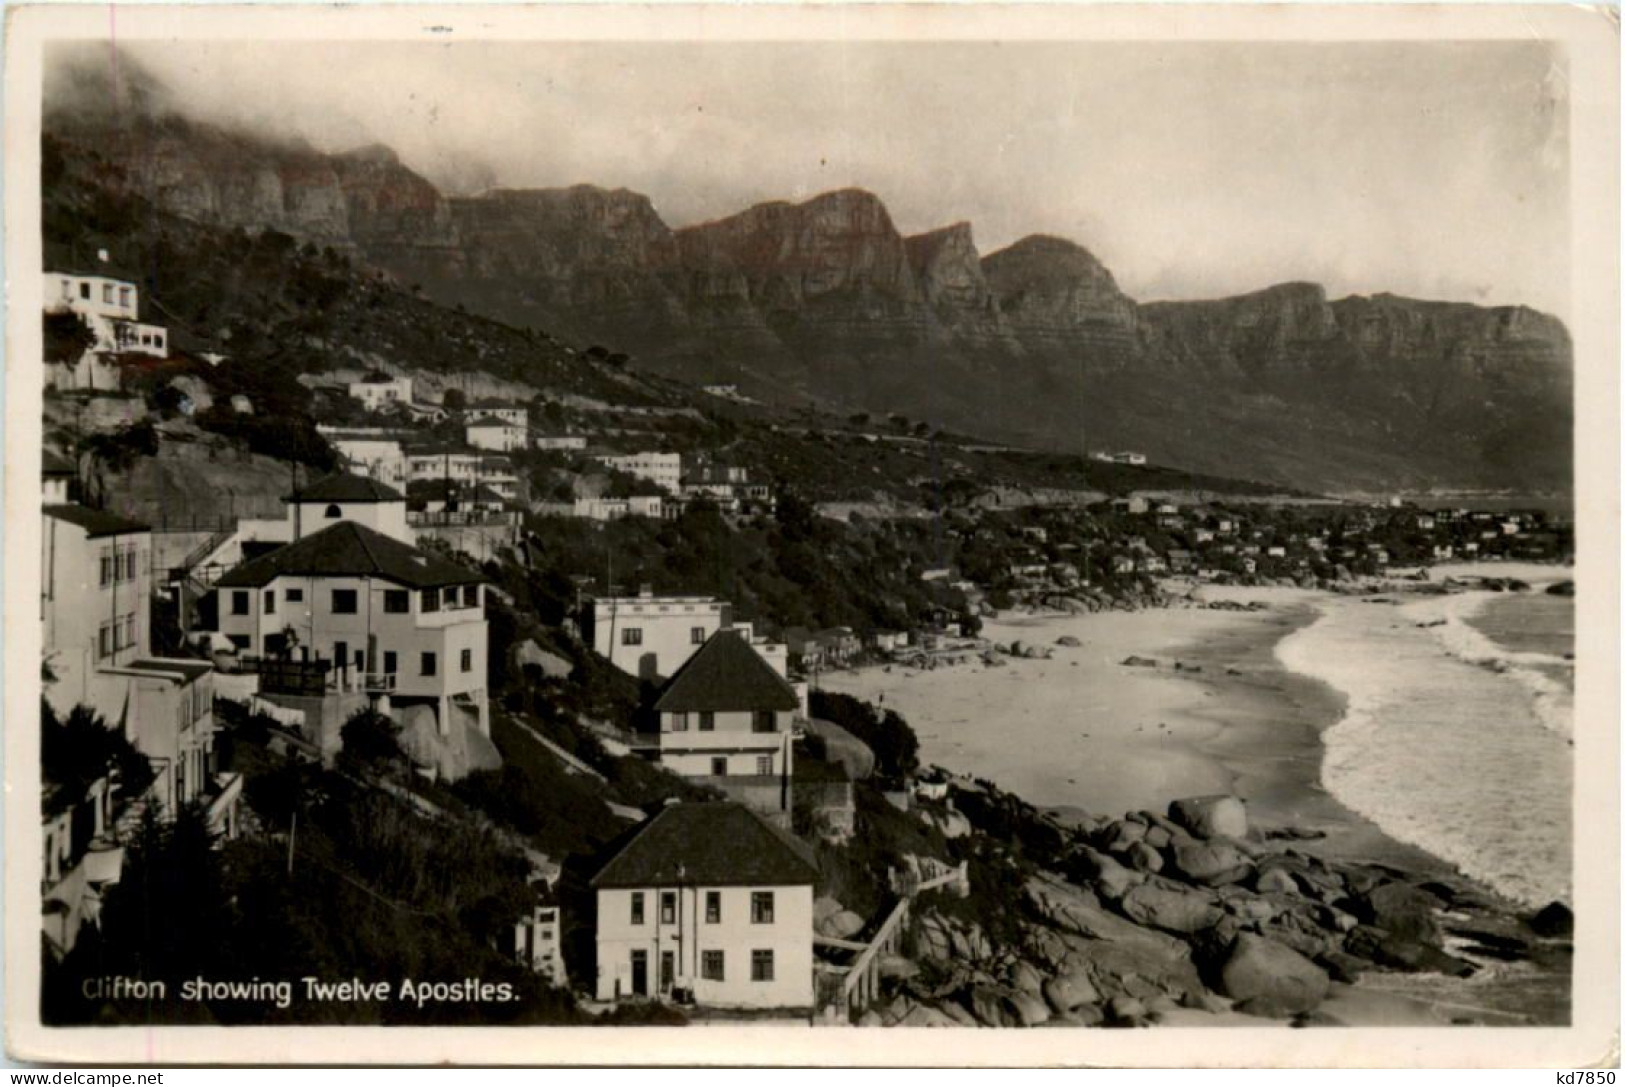 Clifton Showing Twelve Apostles - South Africa